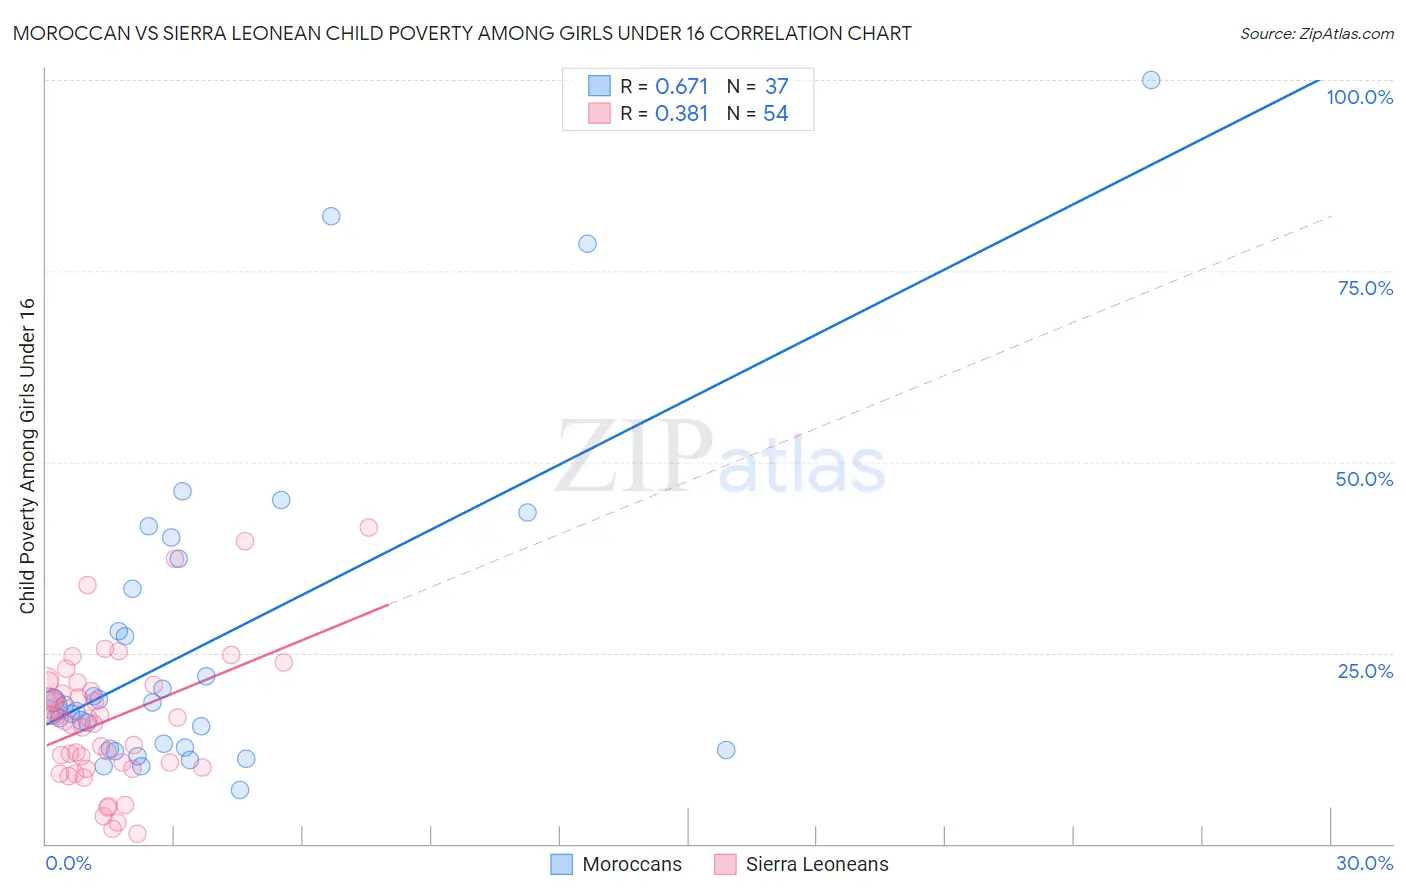 Moroccan vs Sierra Leonean Child Poverty Among Girls Under 16